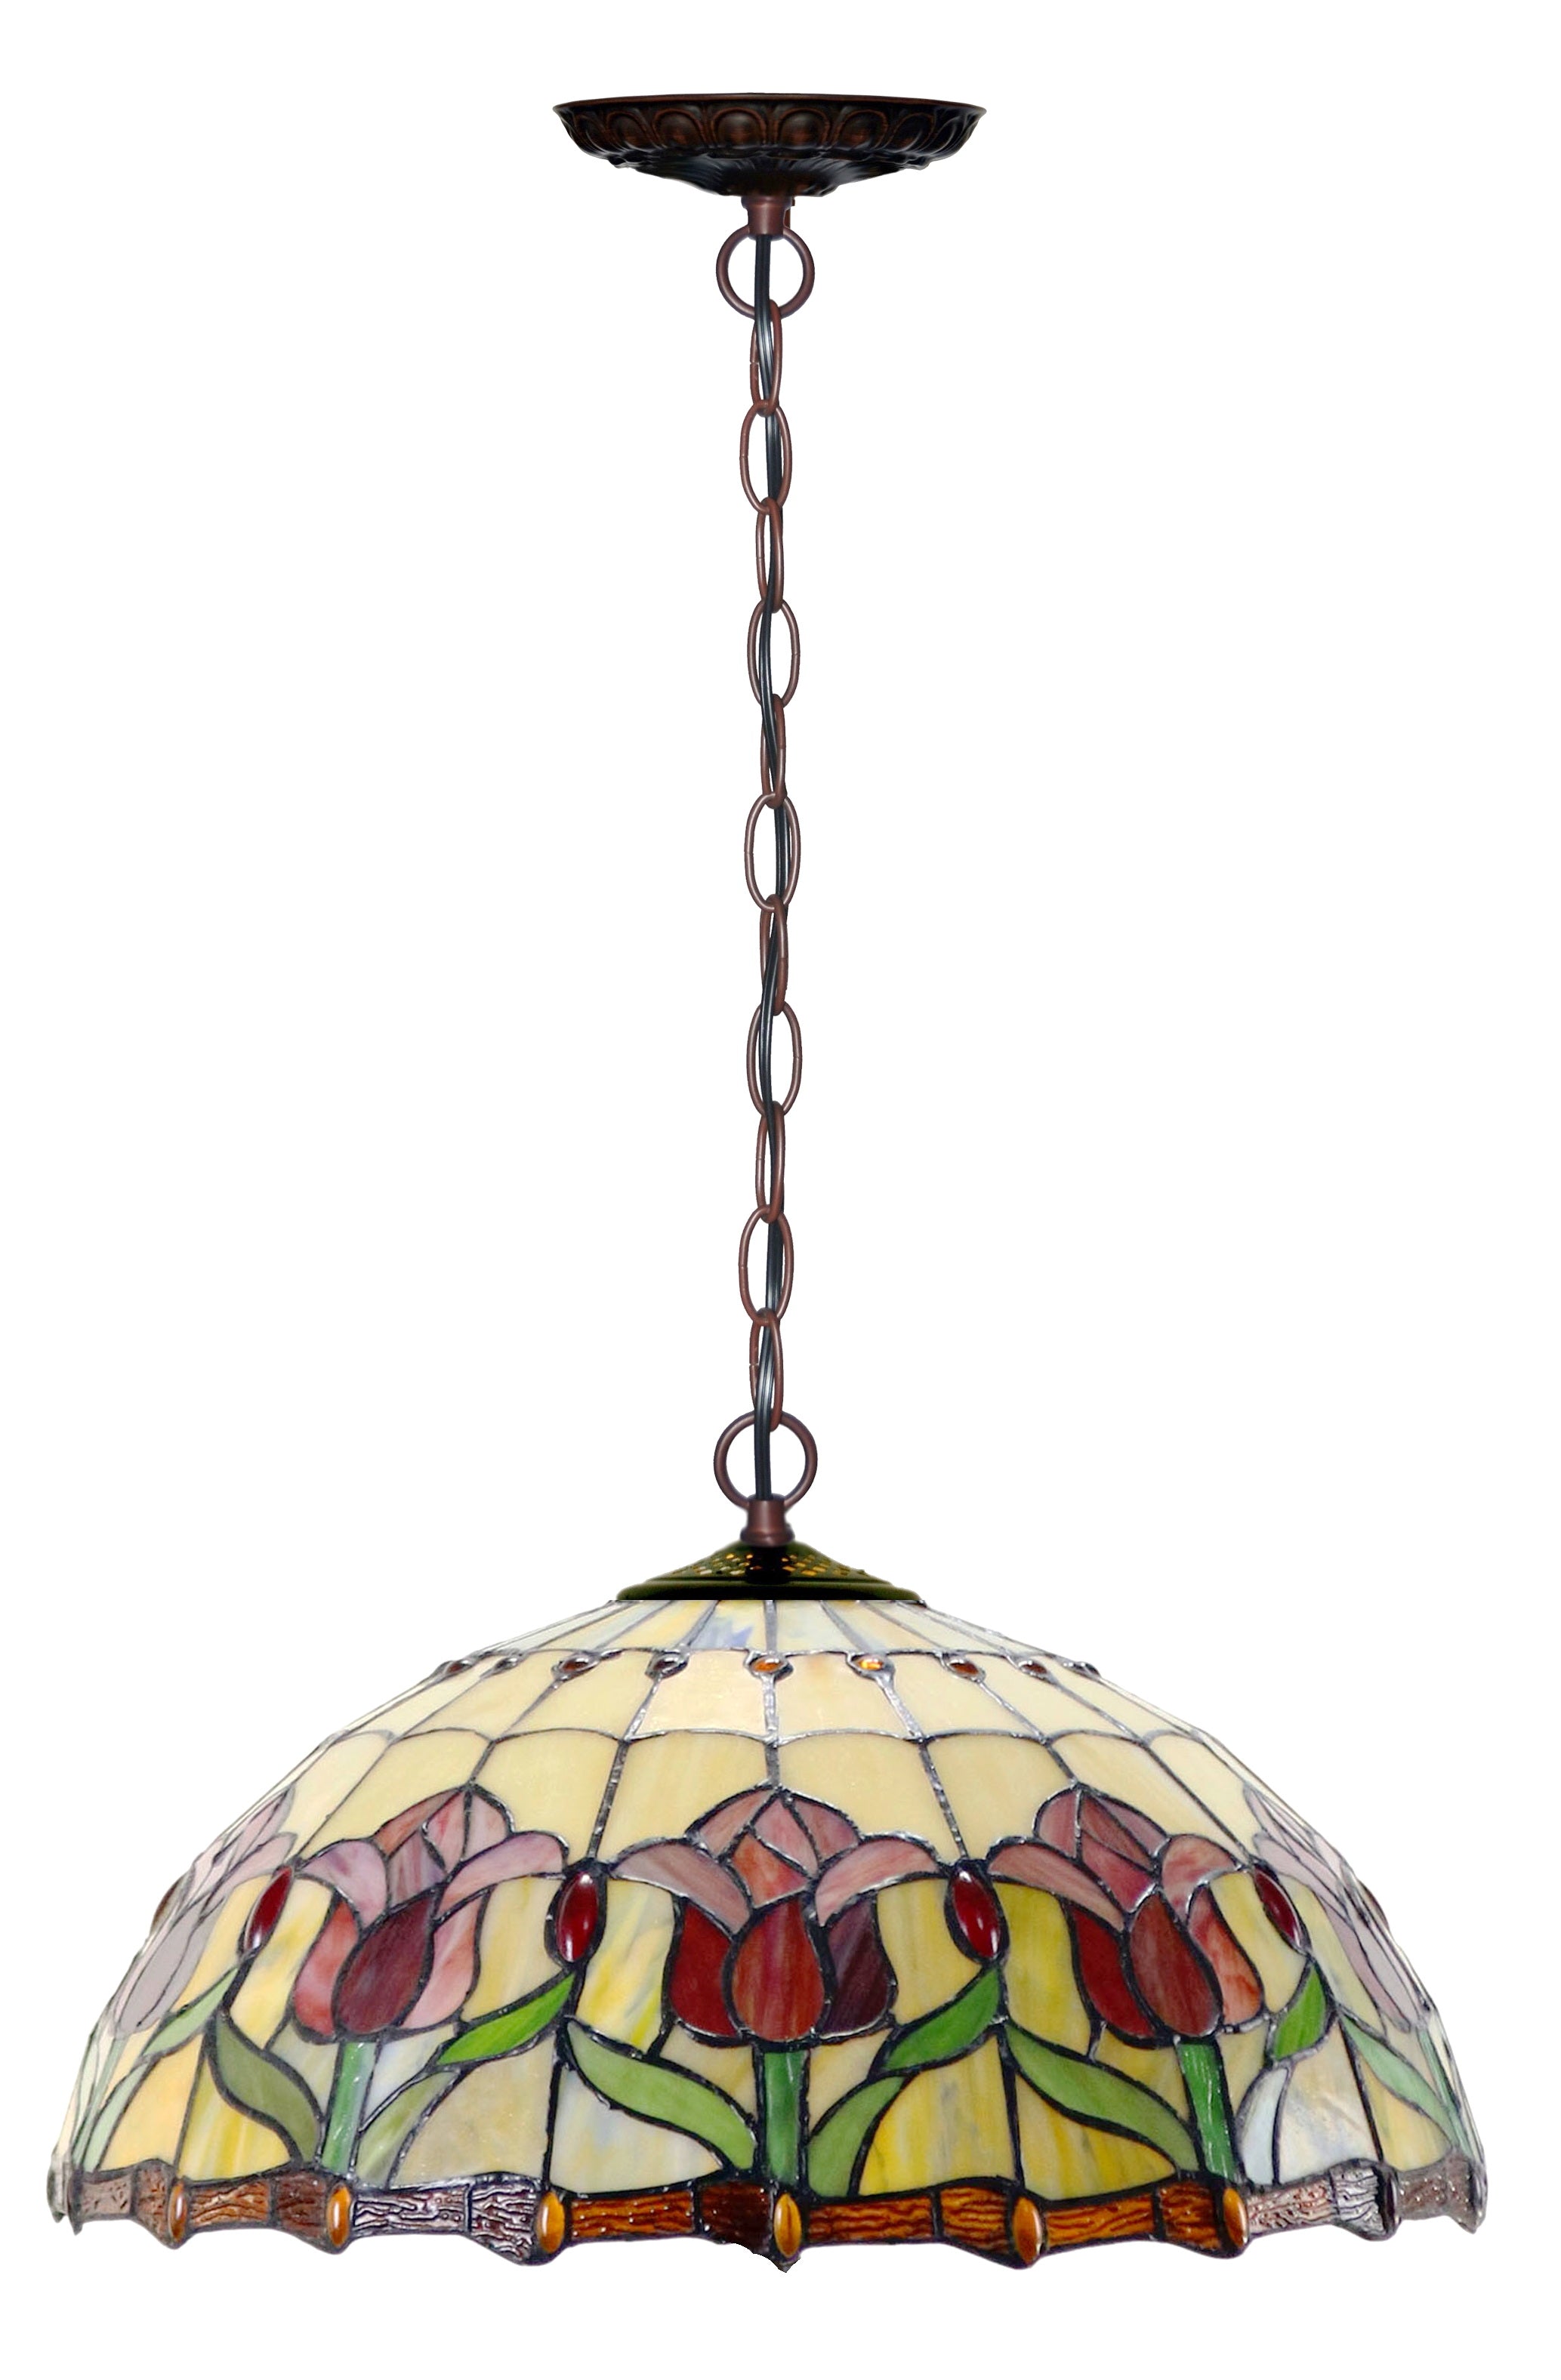 18" Red Tulip Style Stained Glass Leadlight Tiffany Pendant Light